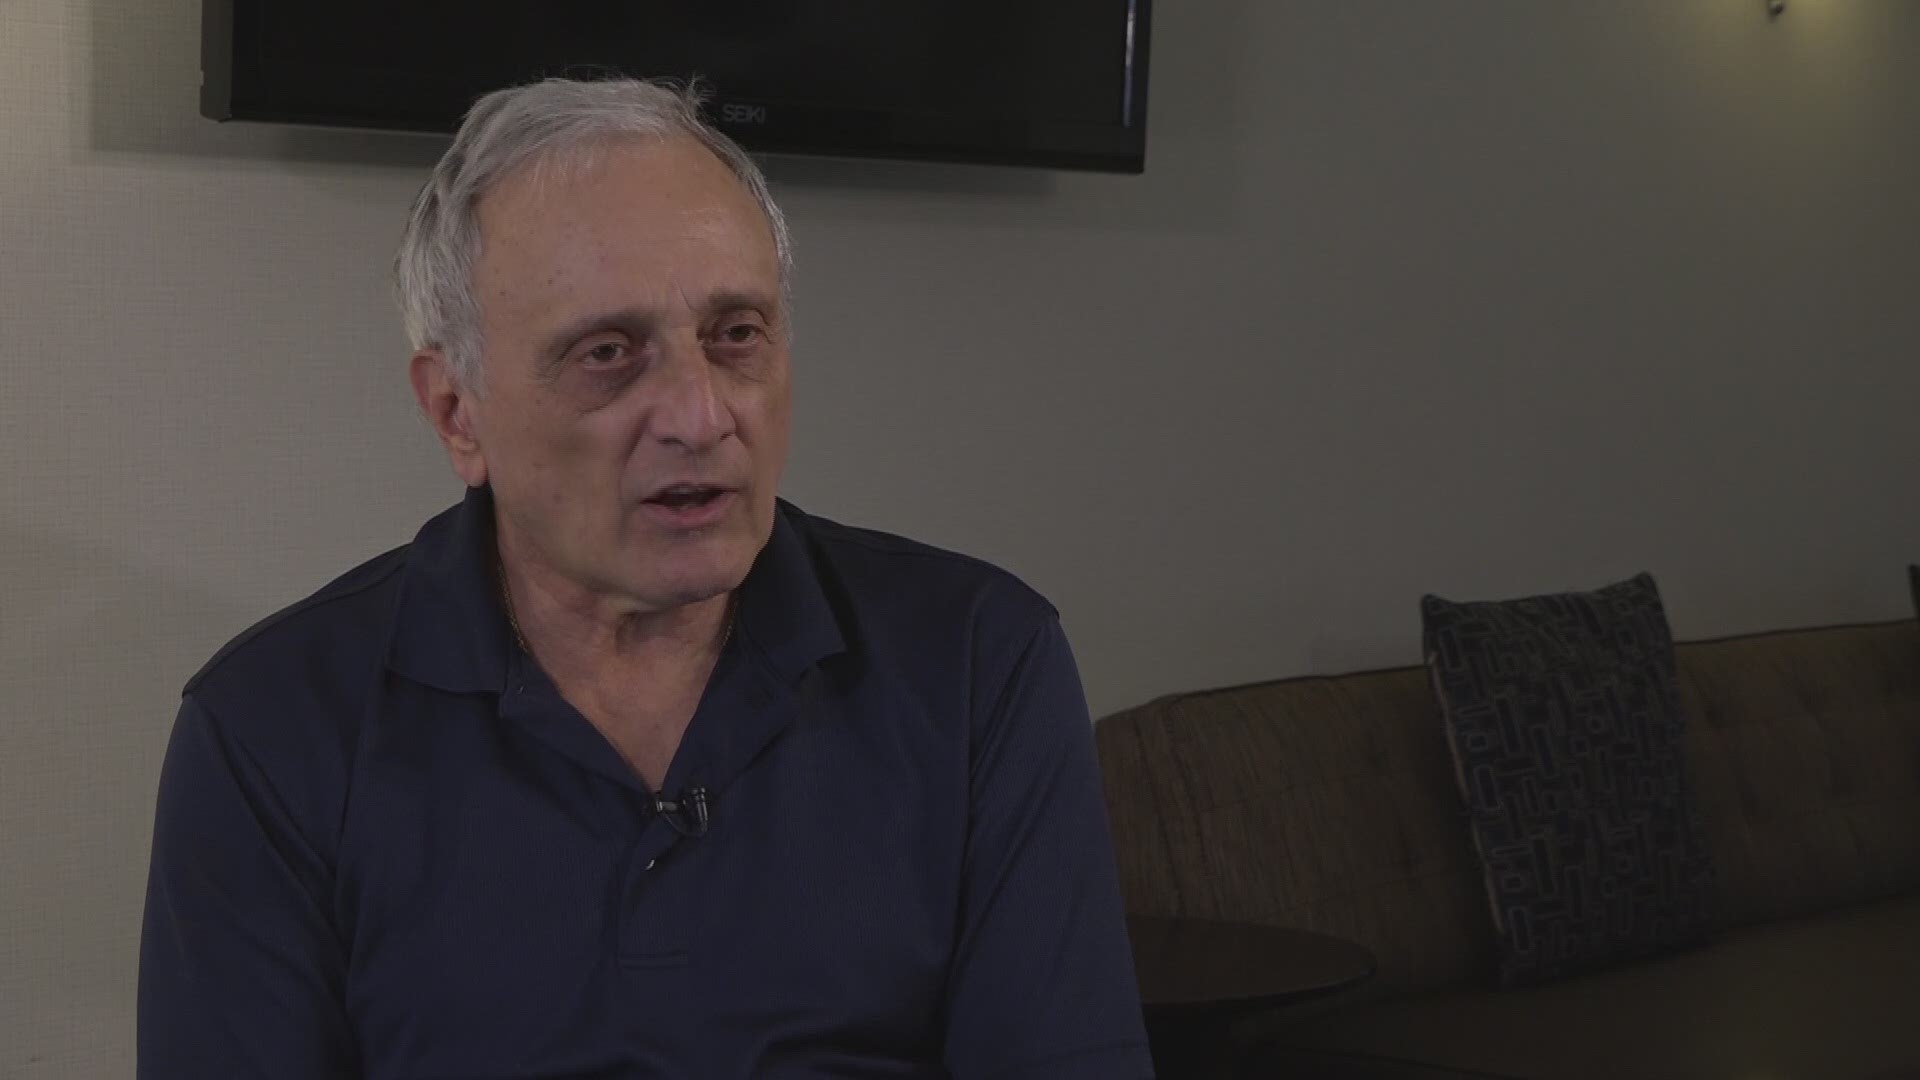 Carl Paladino's full interview with 2 On Your Side's Claudine Ewing about running for the NY27 congressional seat